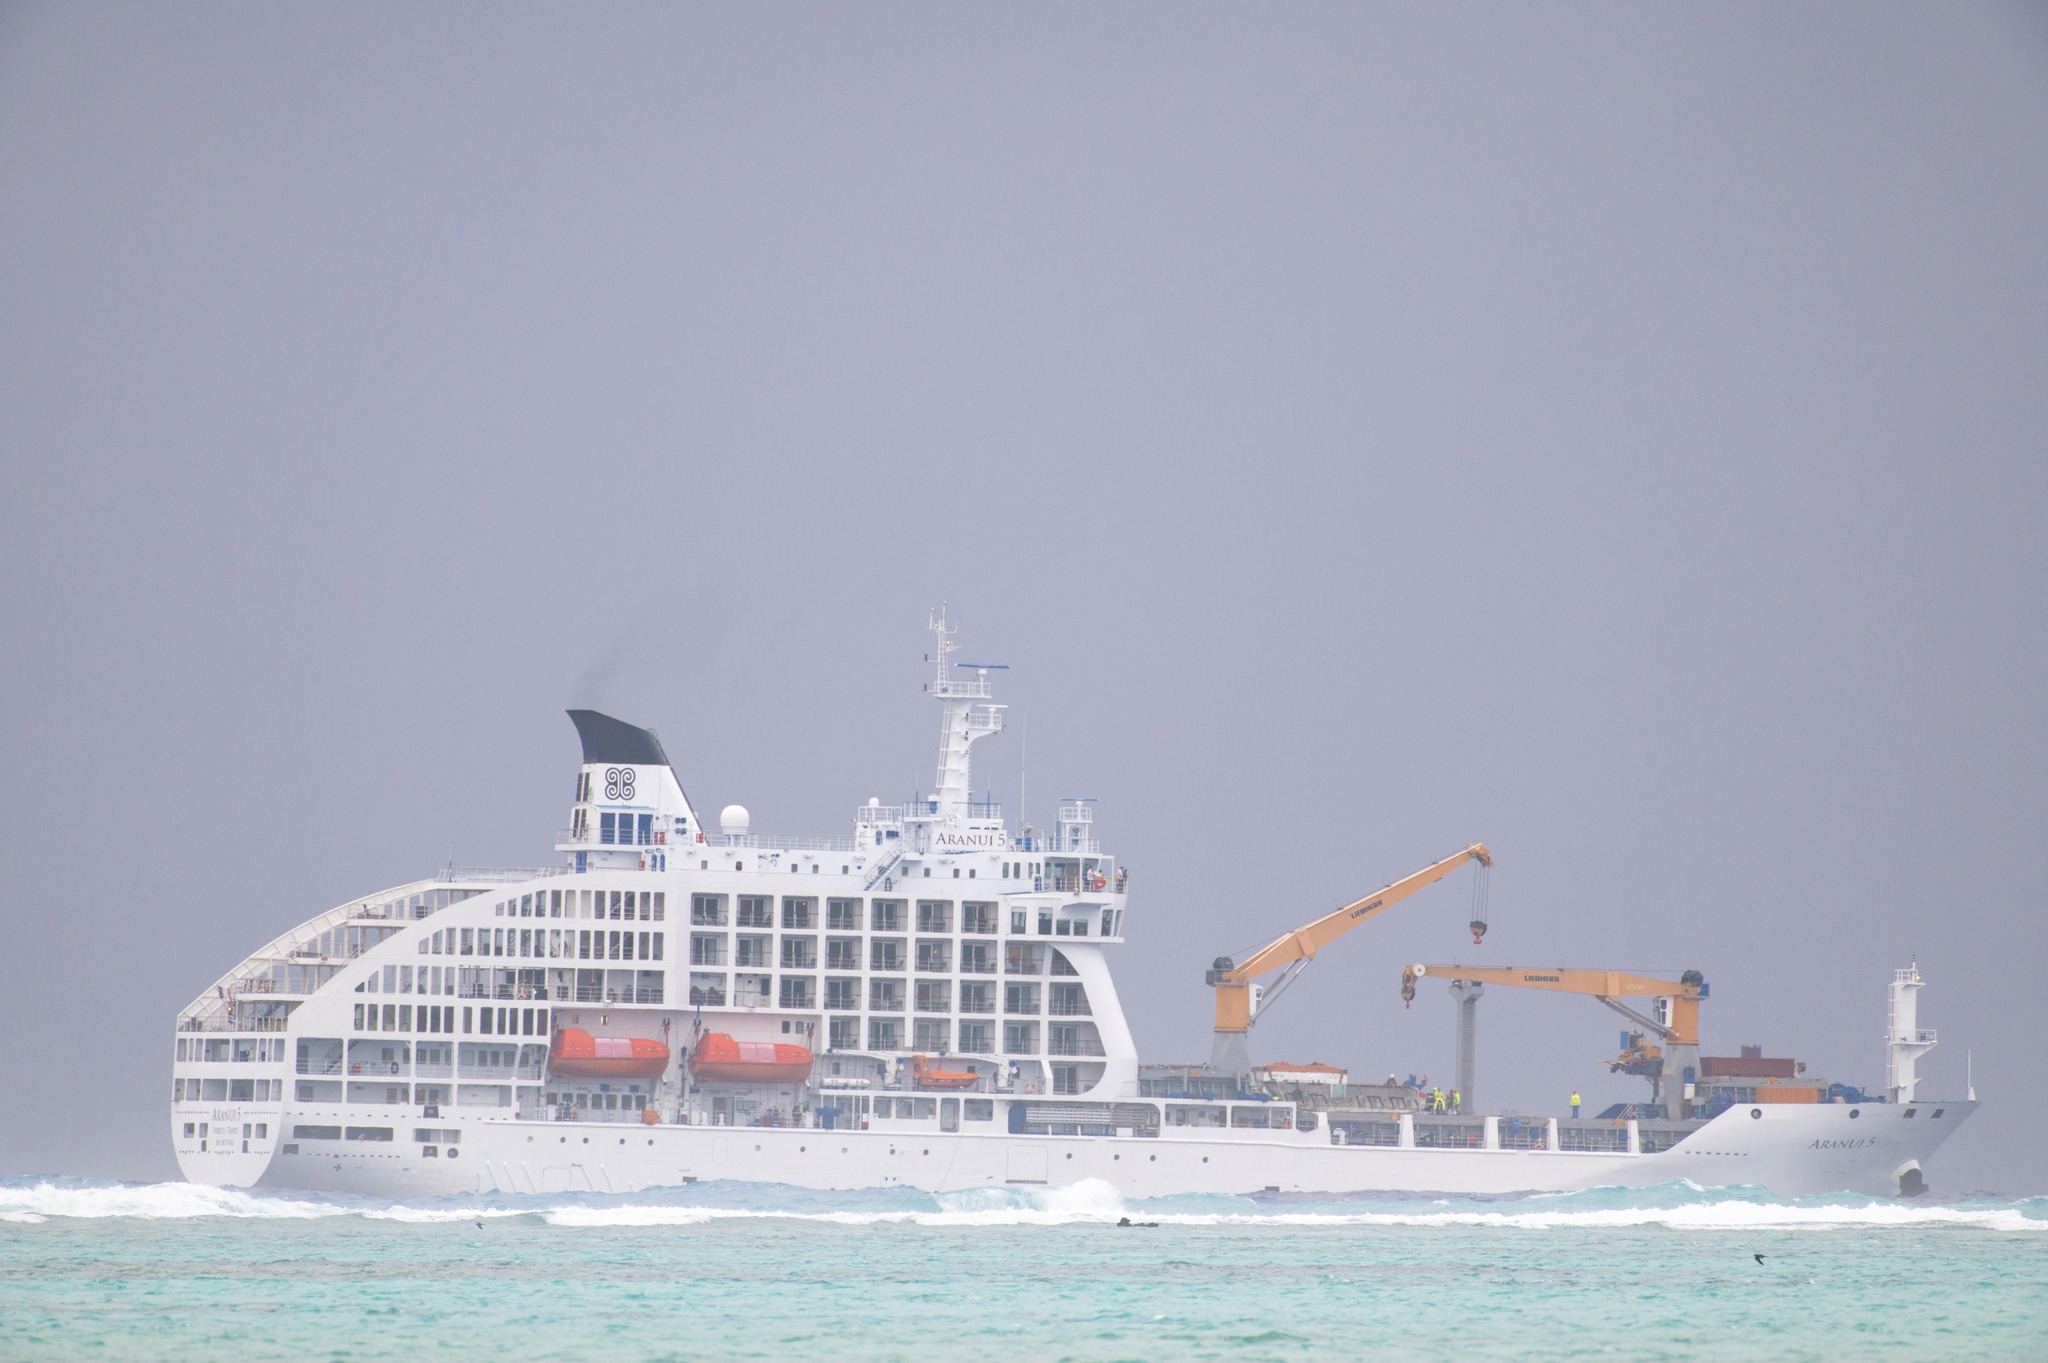 Weather always an obstacle  for cruise ships, says Tourism